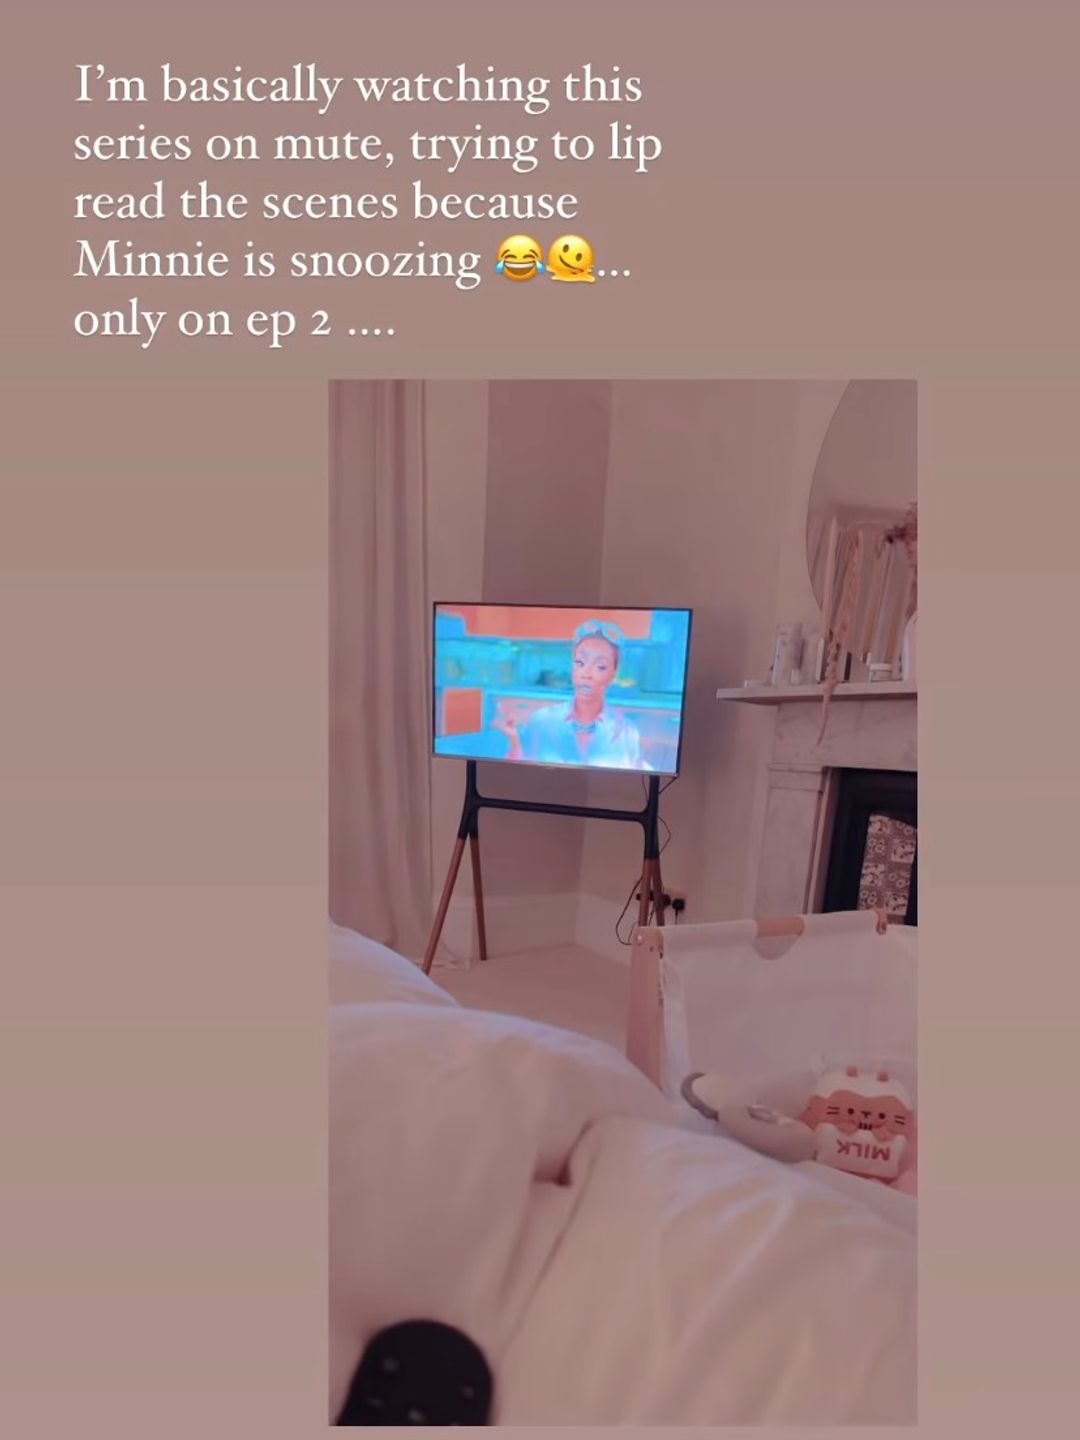 Stacey Dooley watches TV on mute with baby Minnie